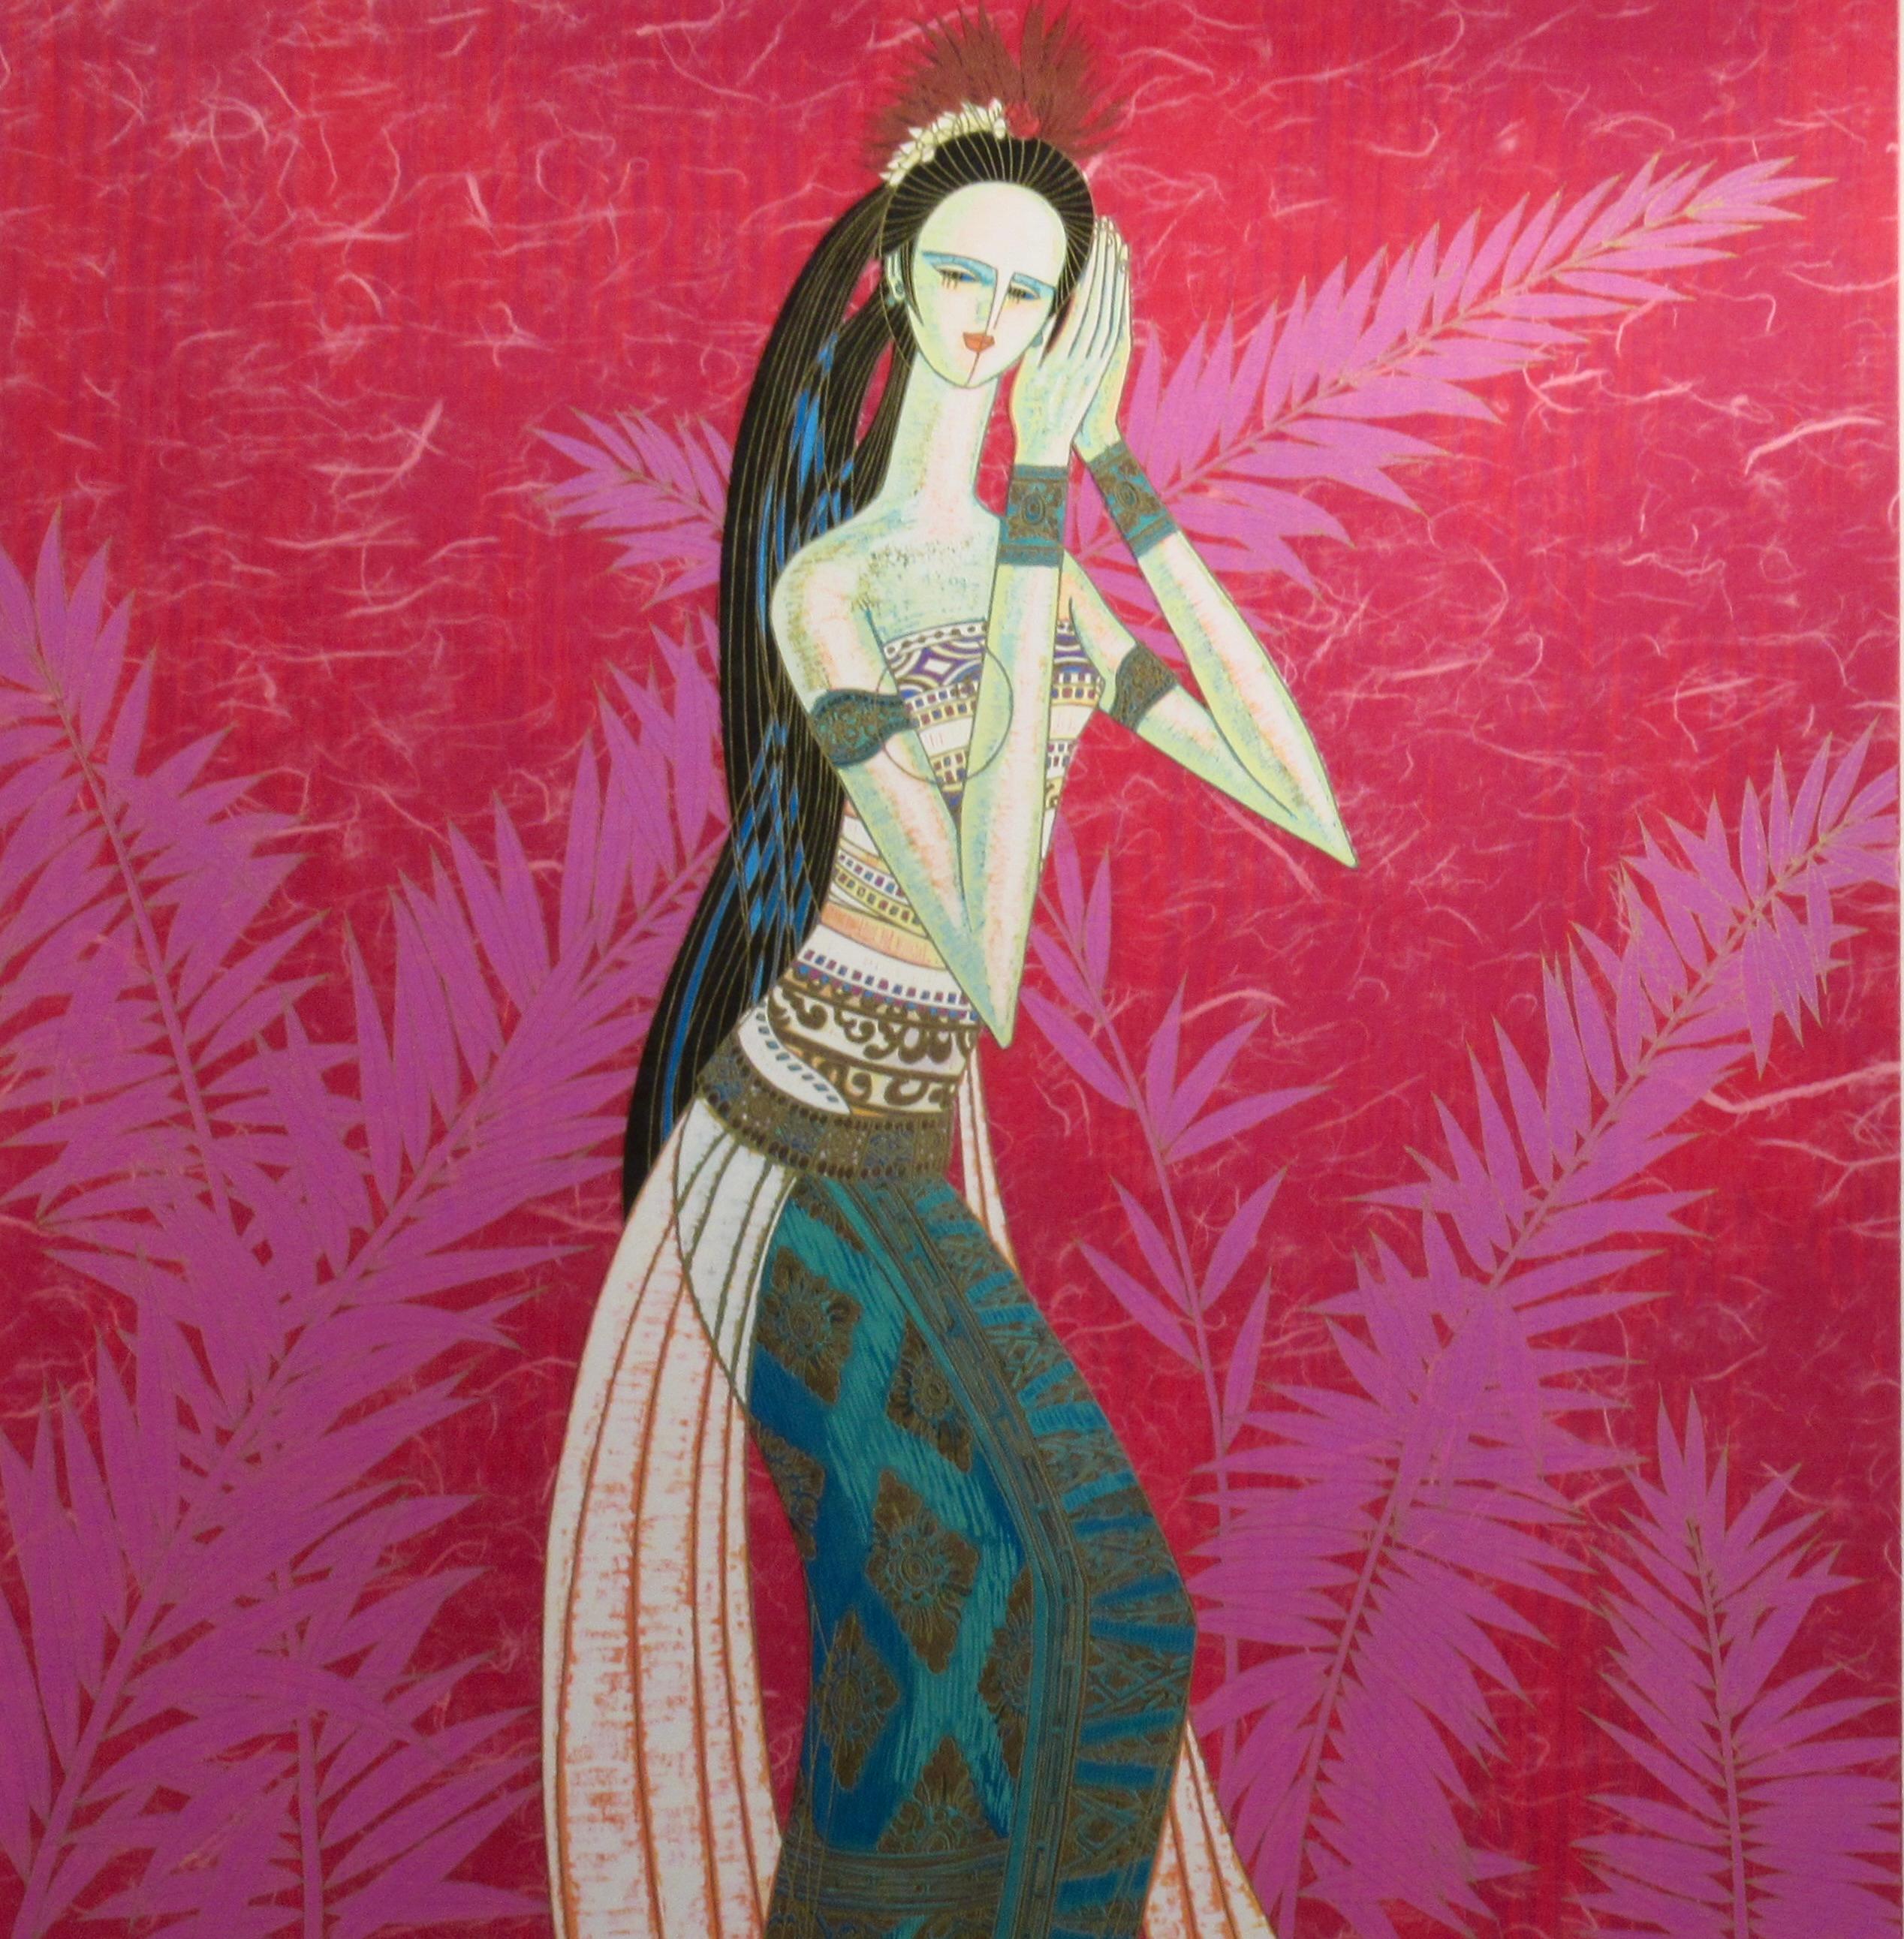 Bali Prinzessin (variante Rot) – Print von Ting Shao Kuang